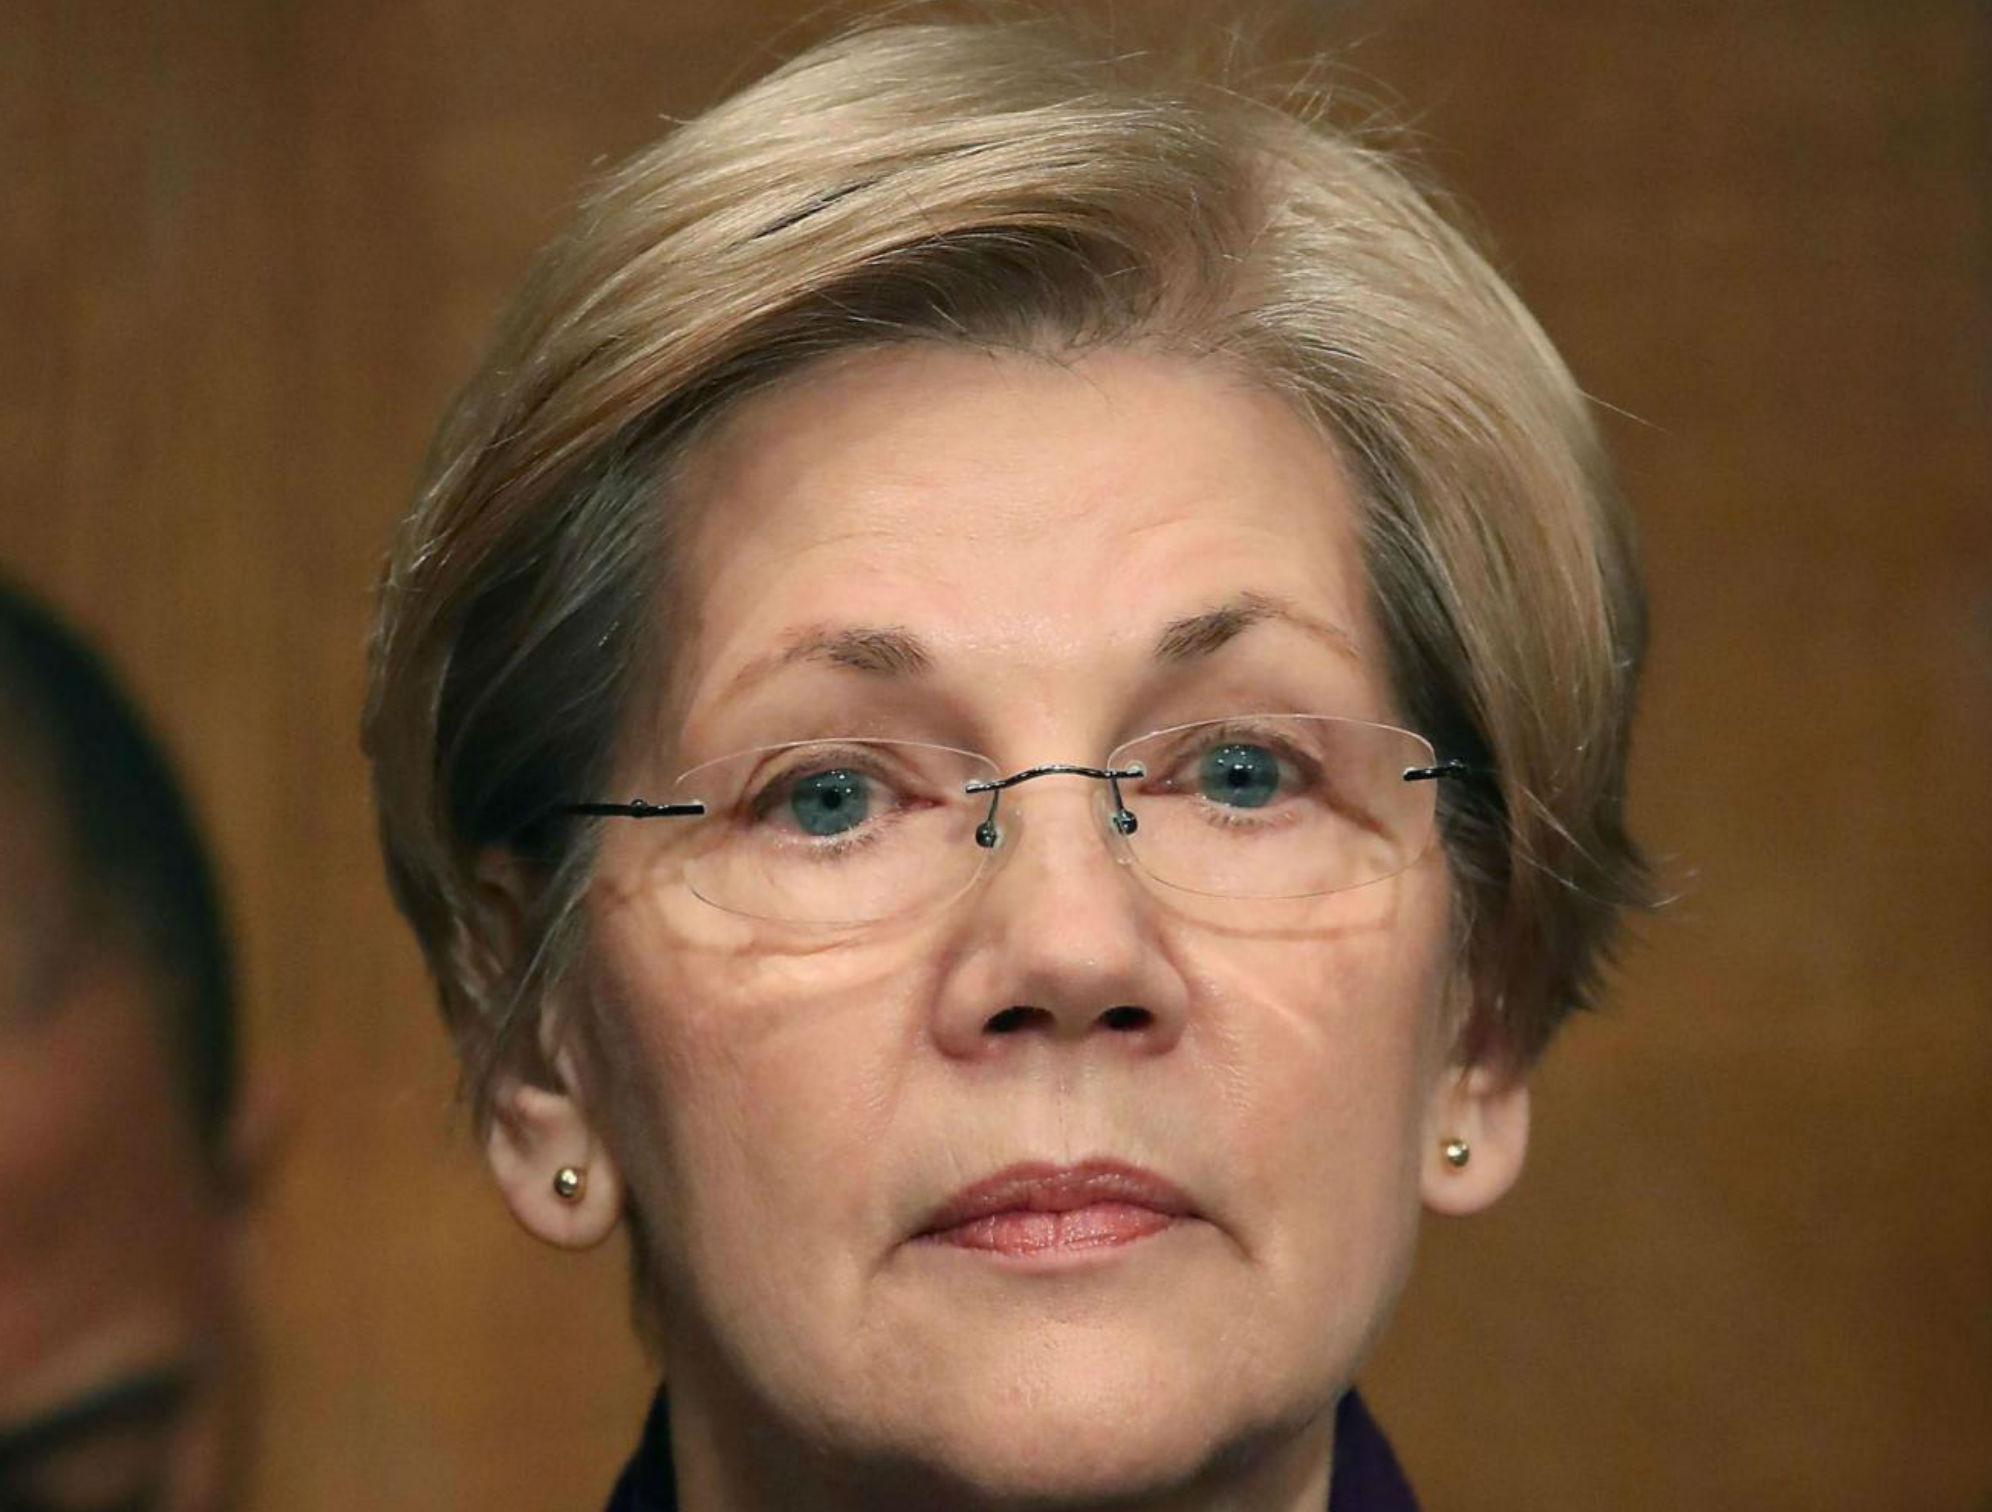 The letter Warren read out has been widely circulated online since she was shut down in the Senate